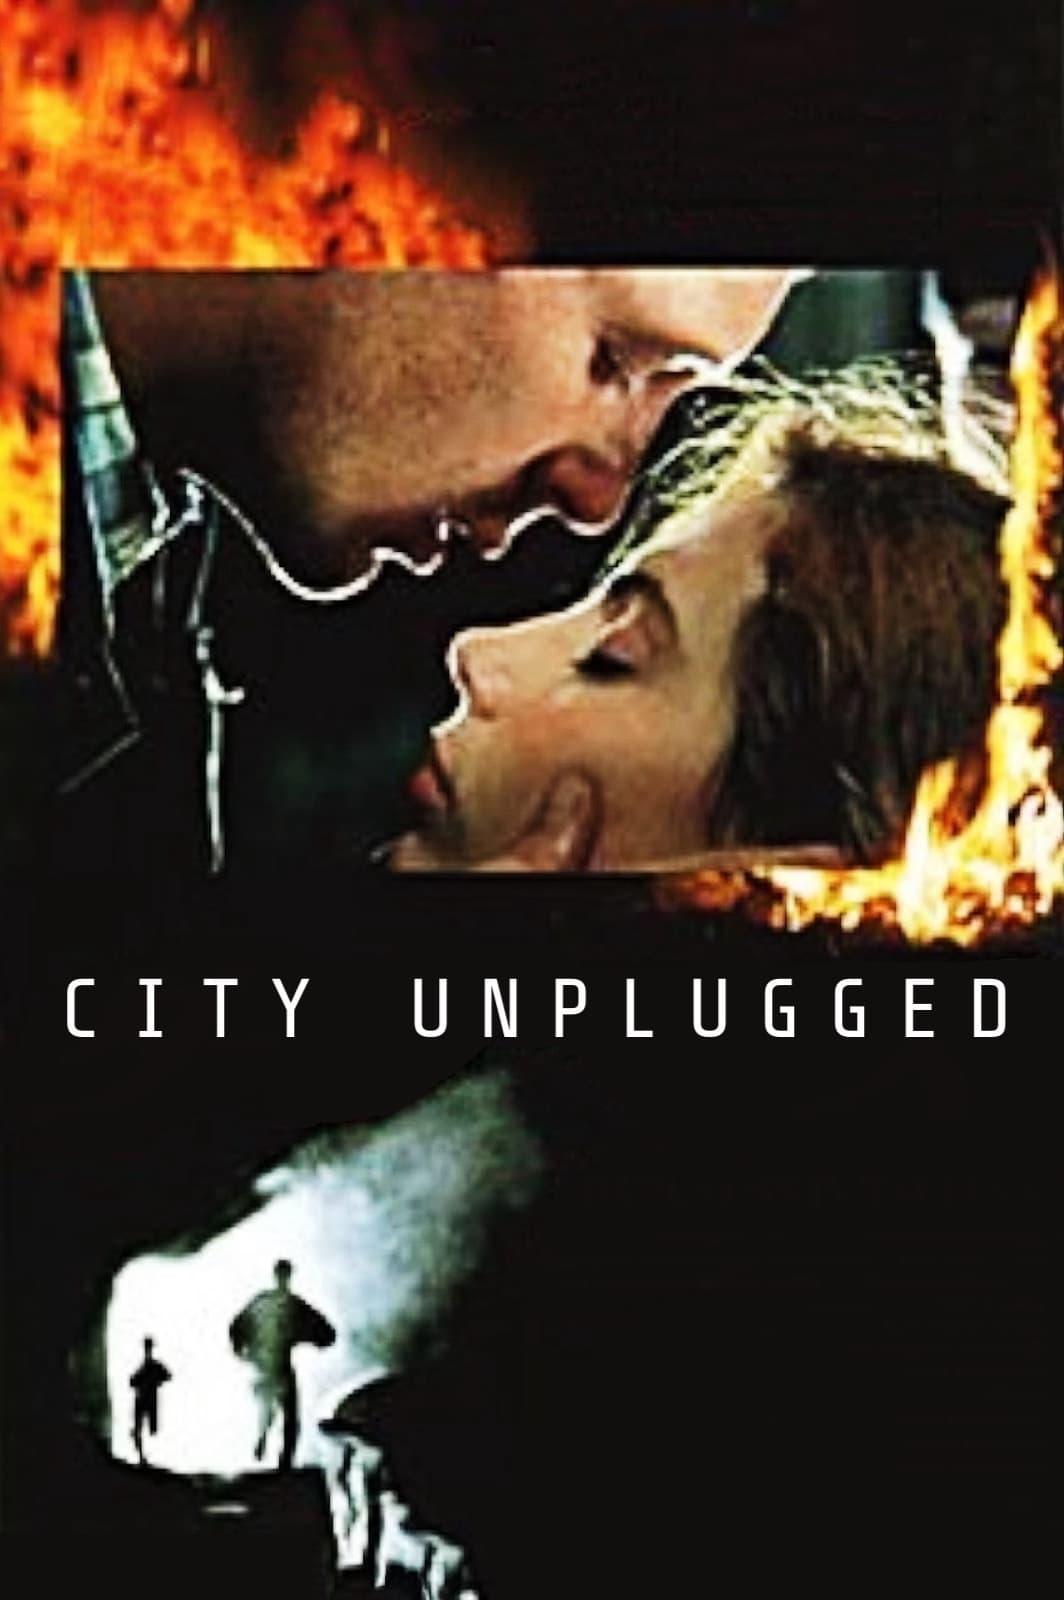 City Unplugged poster